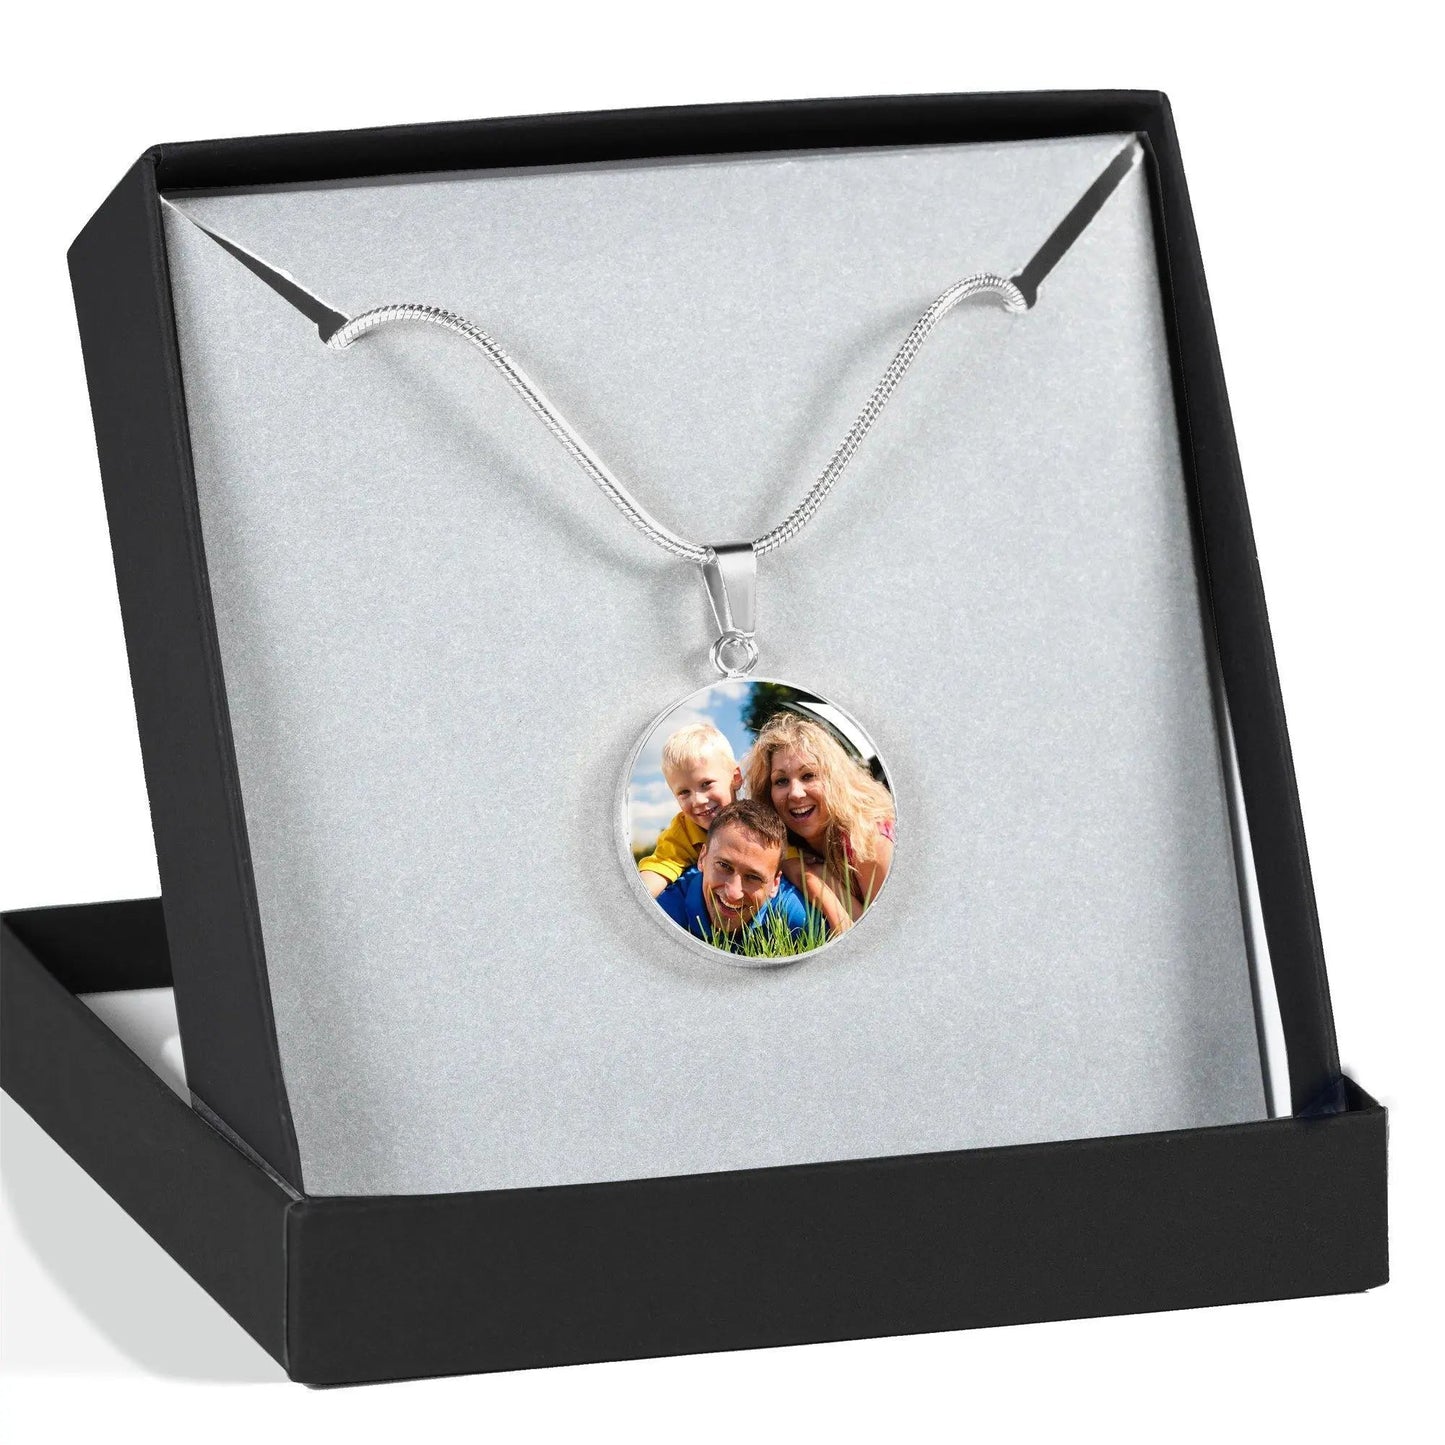 CardWelry Personalized Photo Necklace, Custom Photo Pendant Memory Necklace with Picture, Customized Picture Necklace For Her, Women Necklace Gifts Jewelry Luxury Necklace (Silver) No